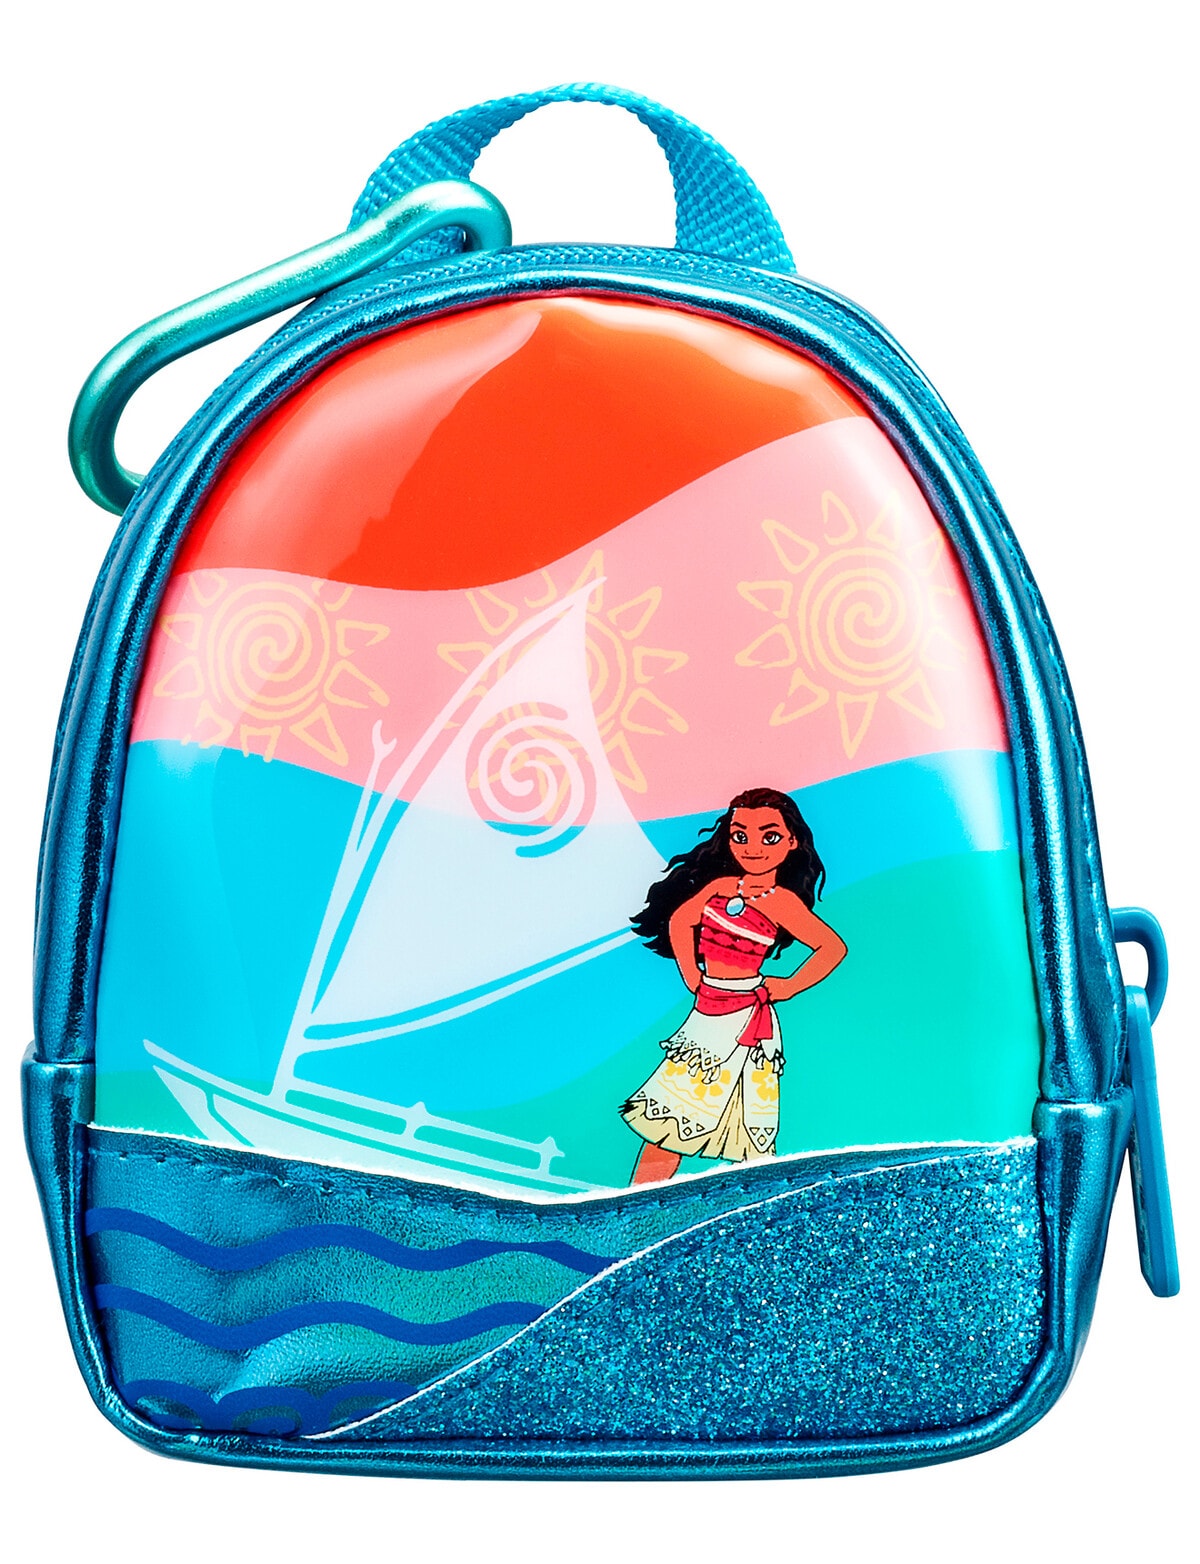 Real Littles Disney Backpack, Assorted - Toys Clearance